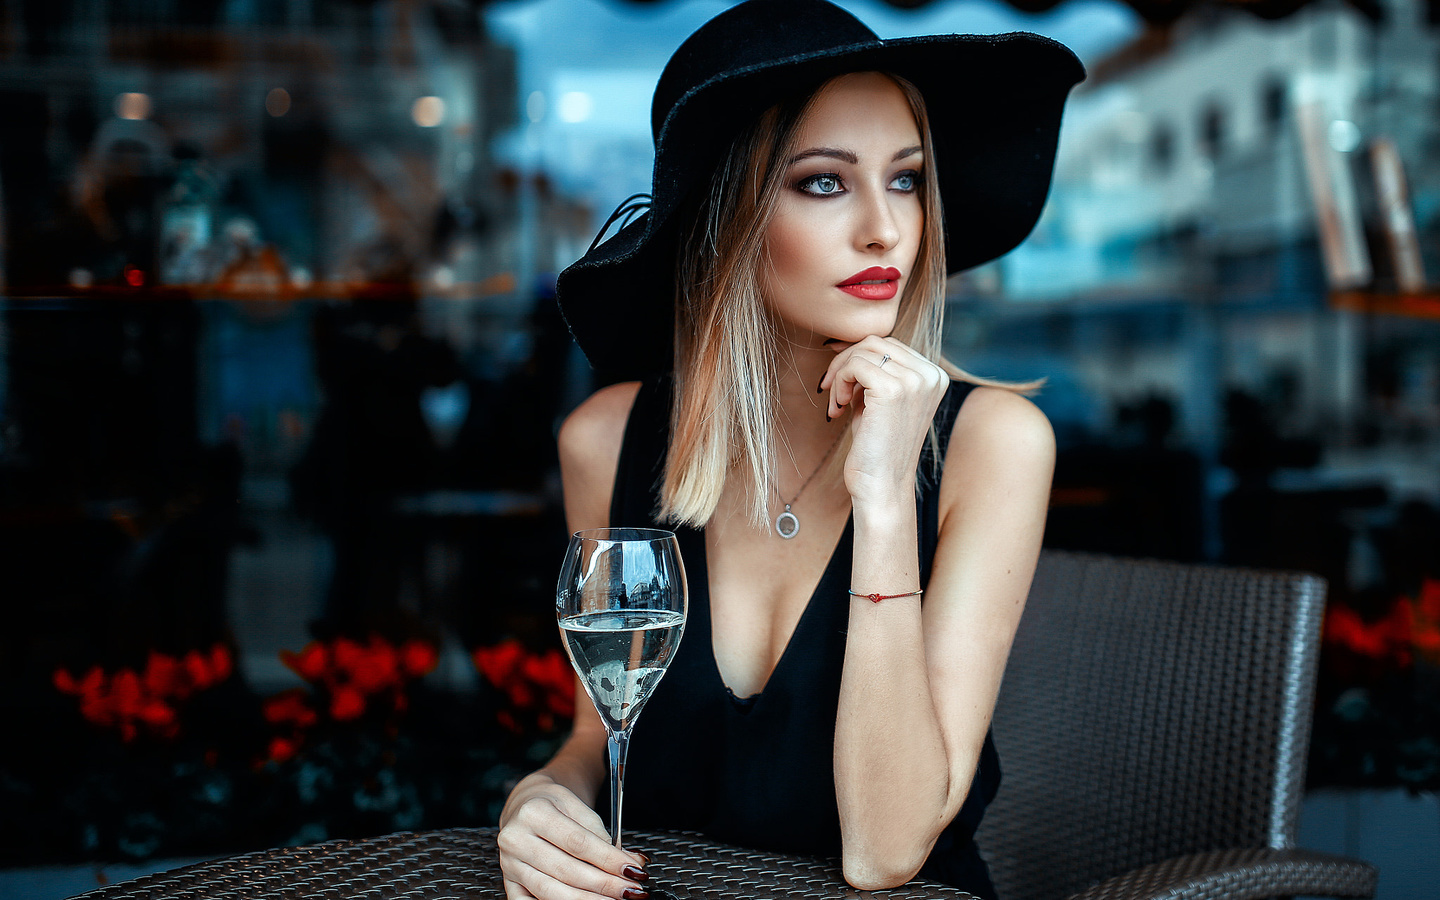 women, hat, blue eyes, painted nails, chair, table, blonde, drinking glass, depth of field, alessandro di cicco, red lipstick, necklace, looking away